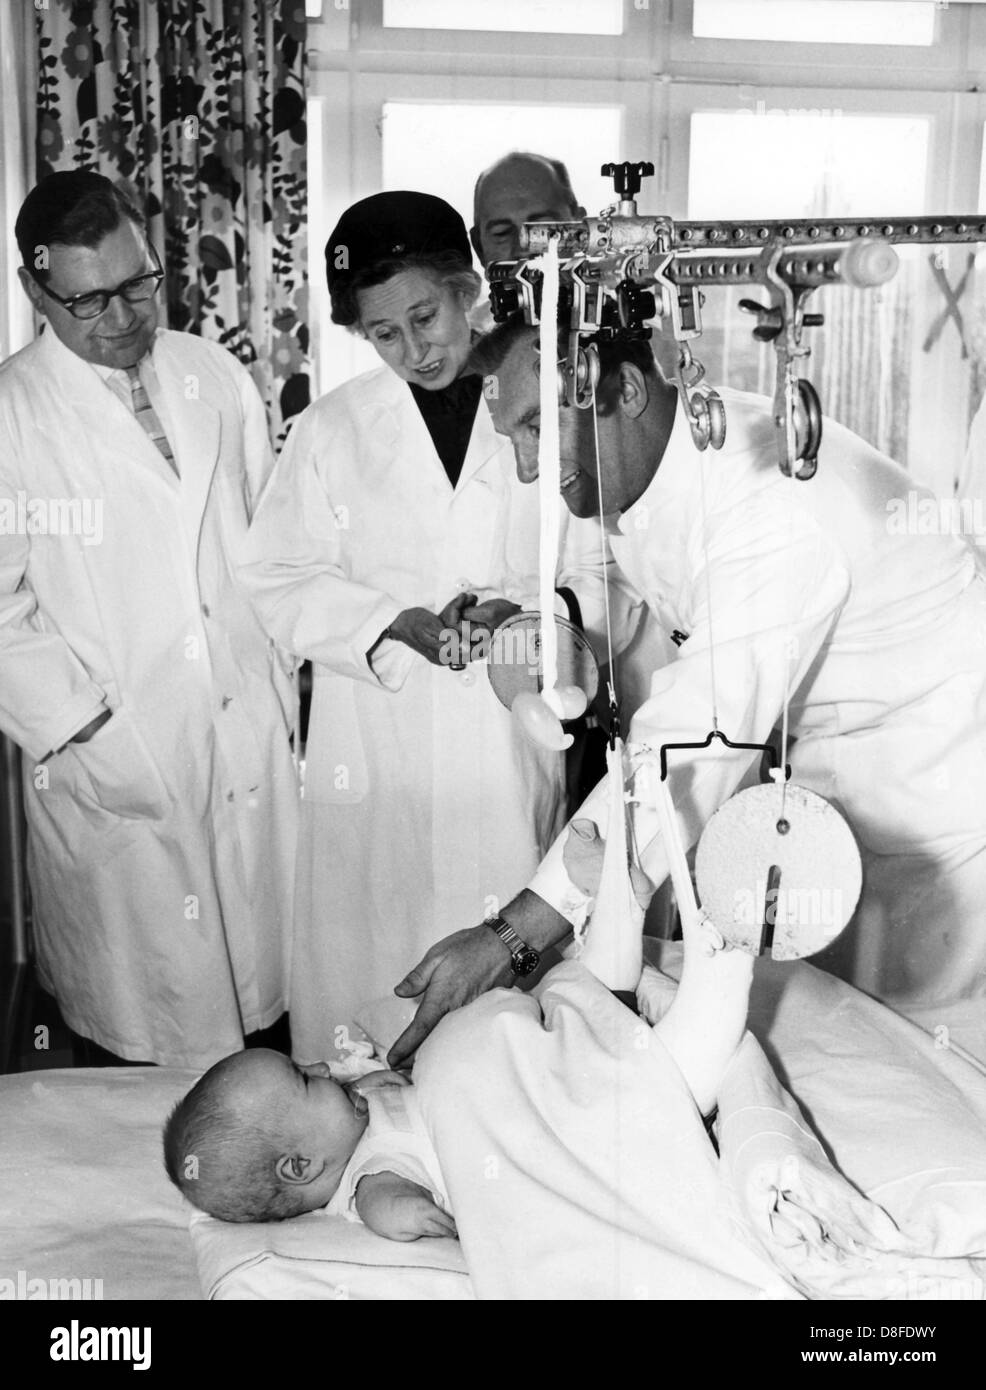 German health minister Elisabeth Schwarzhaupt (c) visits Contergan affected children at the dysmelia ward of the the 'Anna-Stift' hospital in Hanover, Germany, 2 April 1963. To her right stands Professor Dr. Gustav Hauberg, head physician of the hospital. Stock Photo